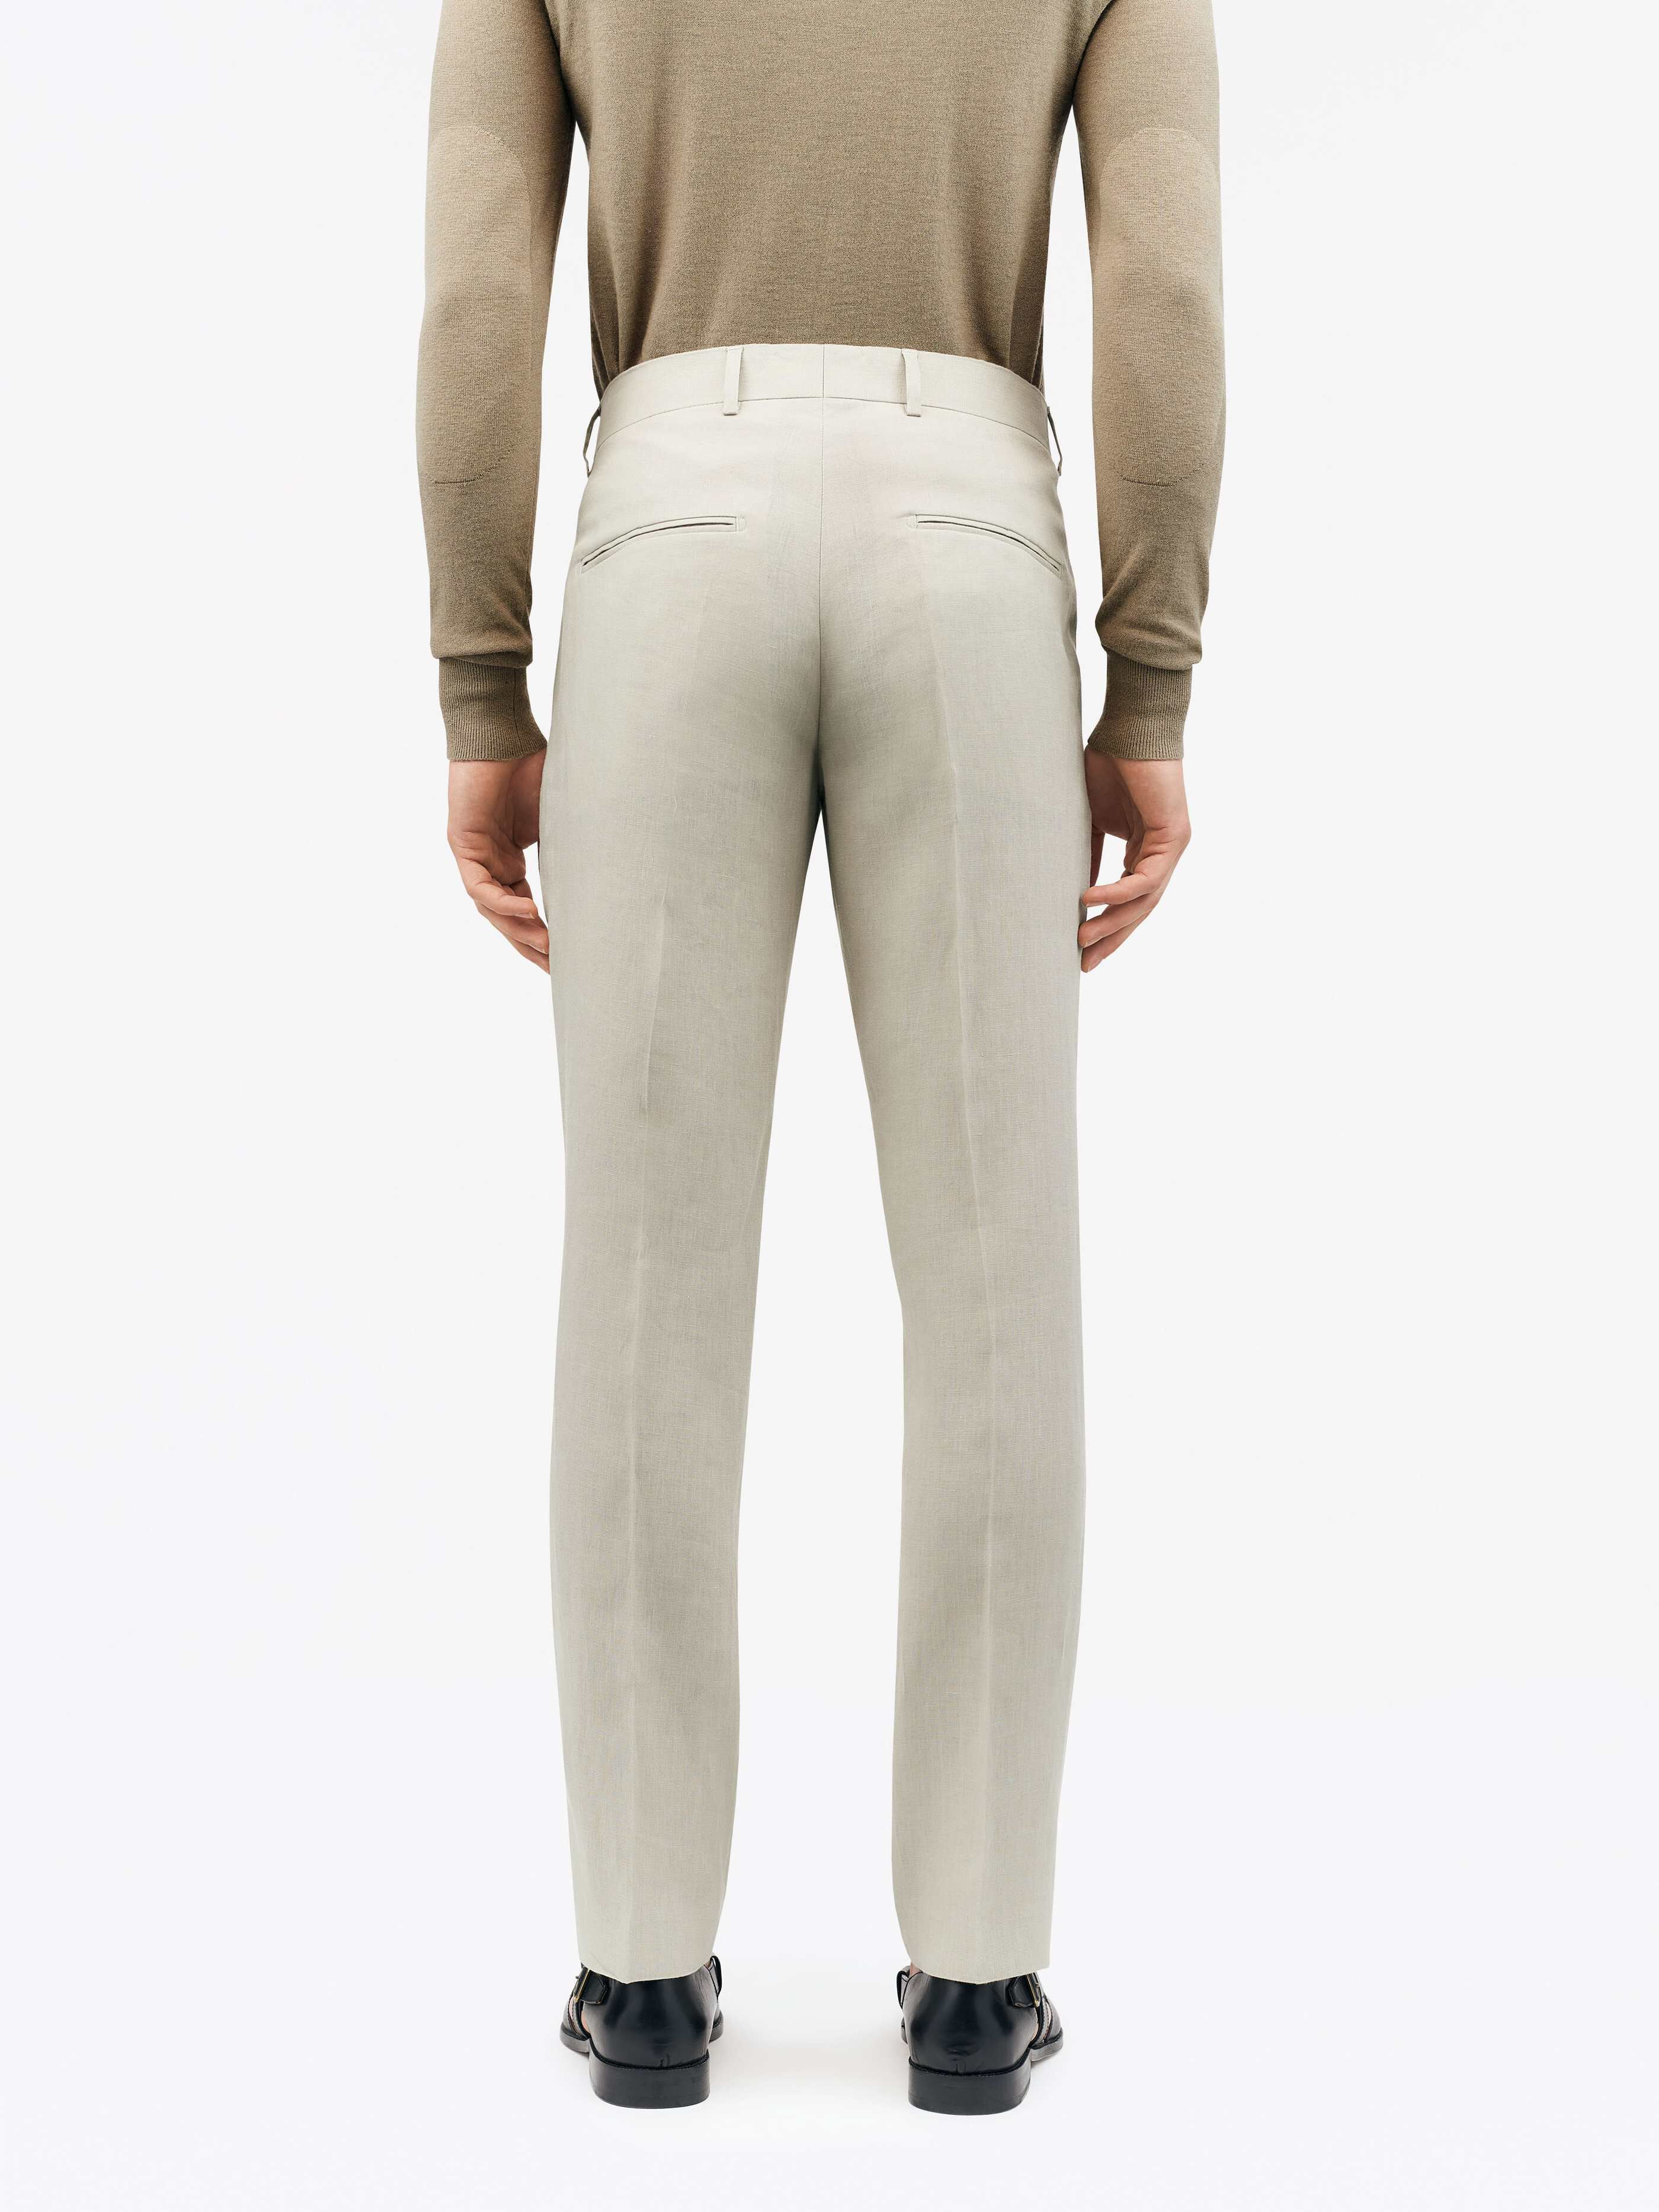 TIGER OF SWEDEN Tenutas Trousers in Beige T72167002 | Shop from eightywingold an official brand partner for Tiger of Sweden Canada and US.